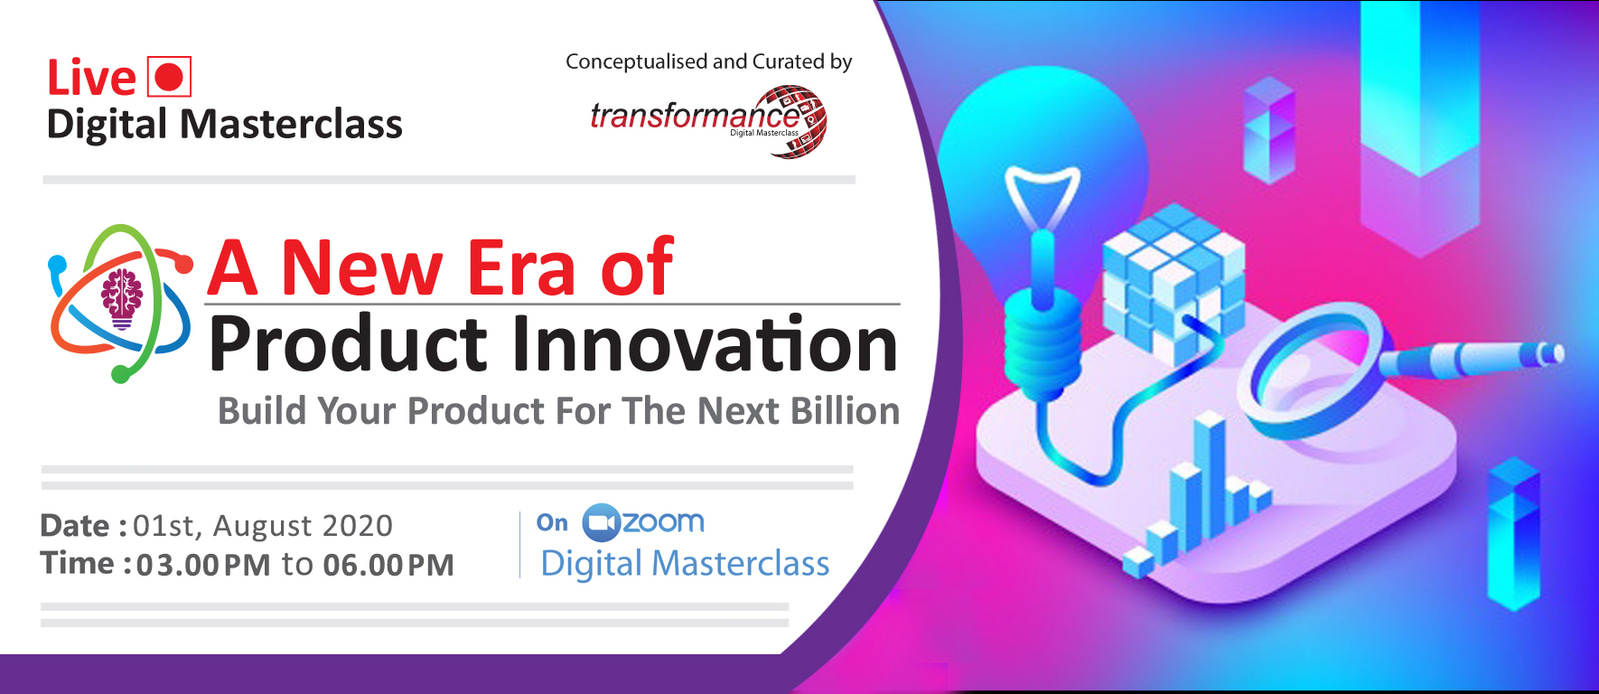 A New Era of Product Innovation